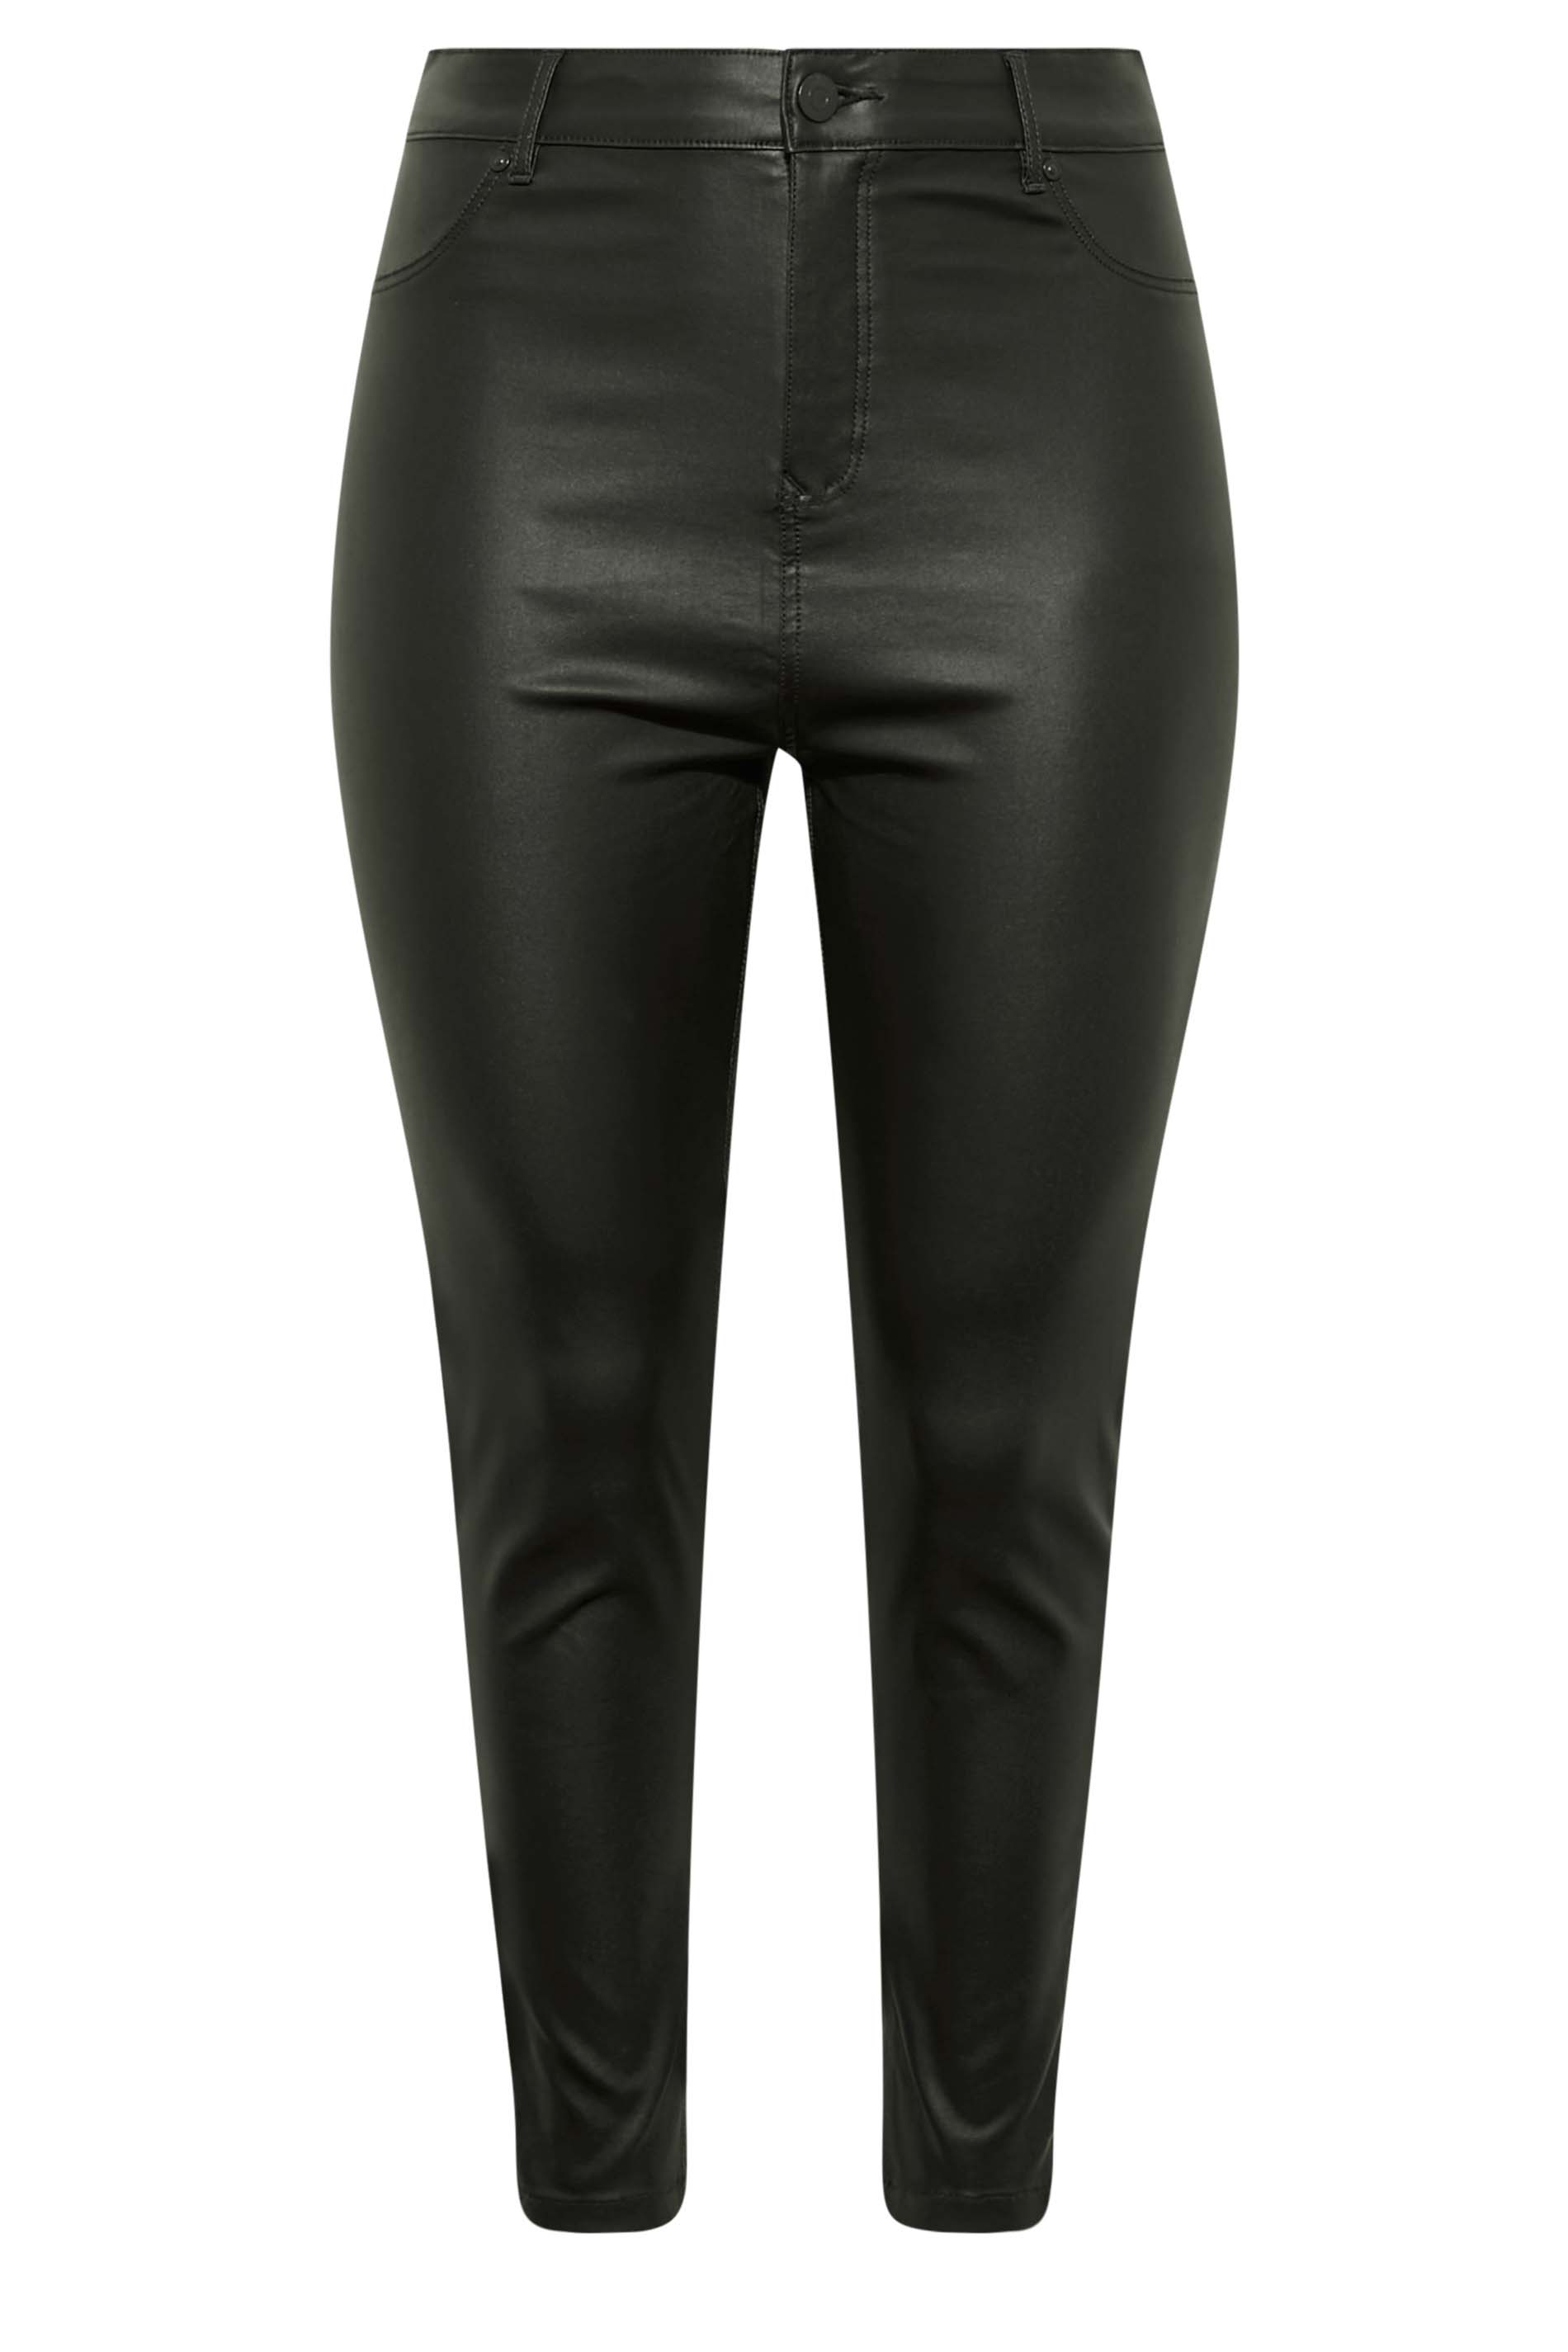 Plus Size Black Coated Skinny Stretch AVA Jeans | Yours Clothing